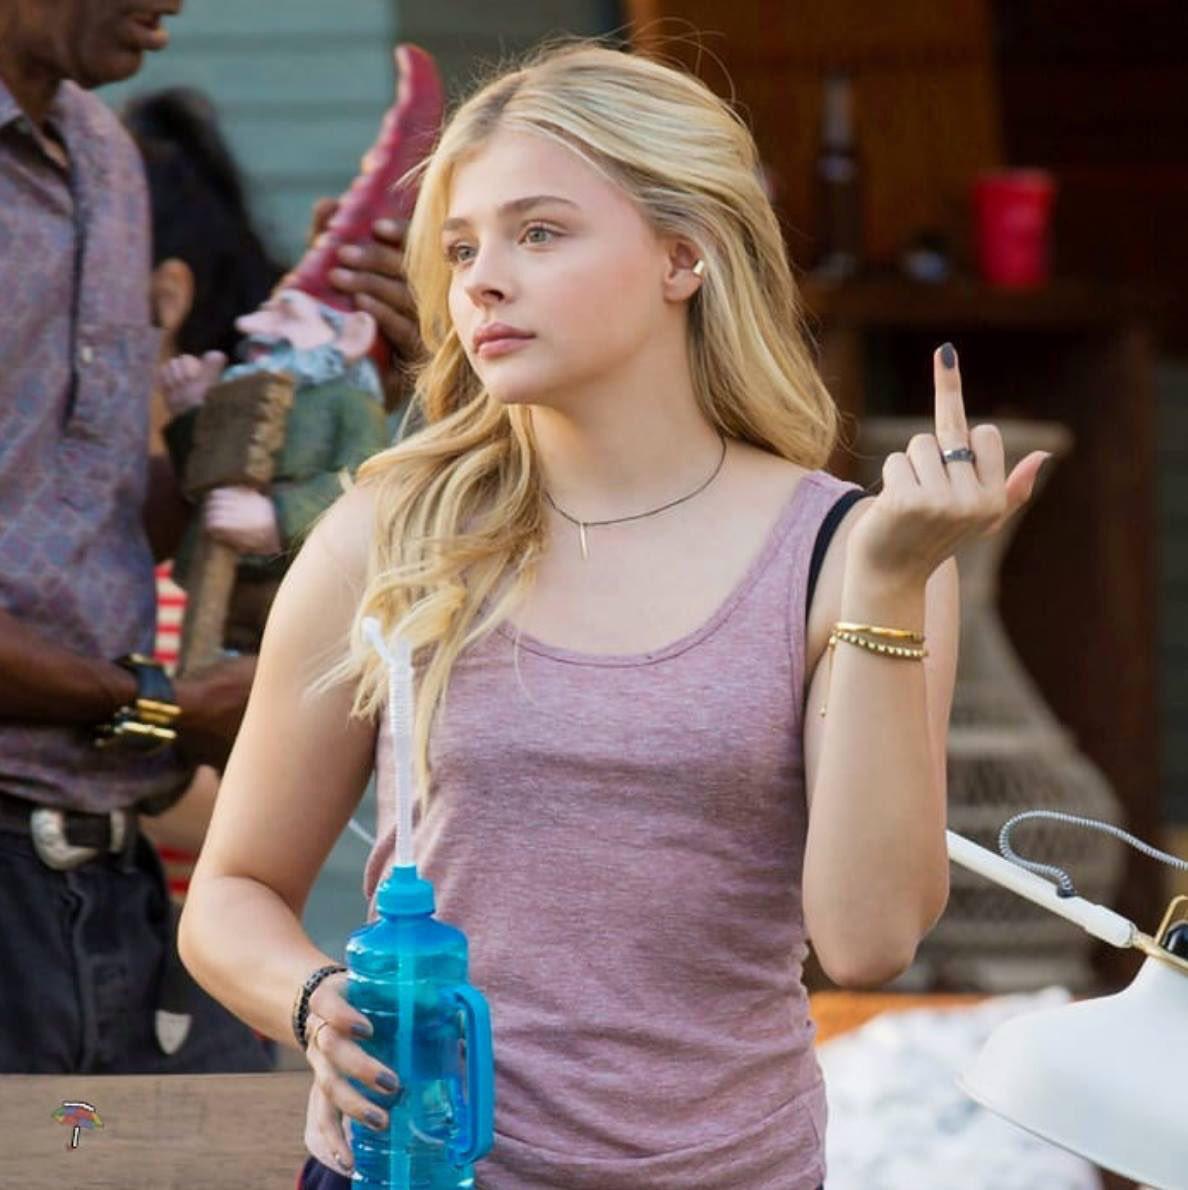 I want to get super dirty with Chloe Grace Moretz